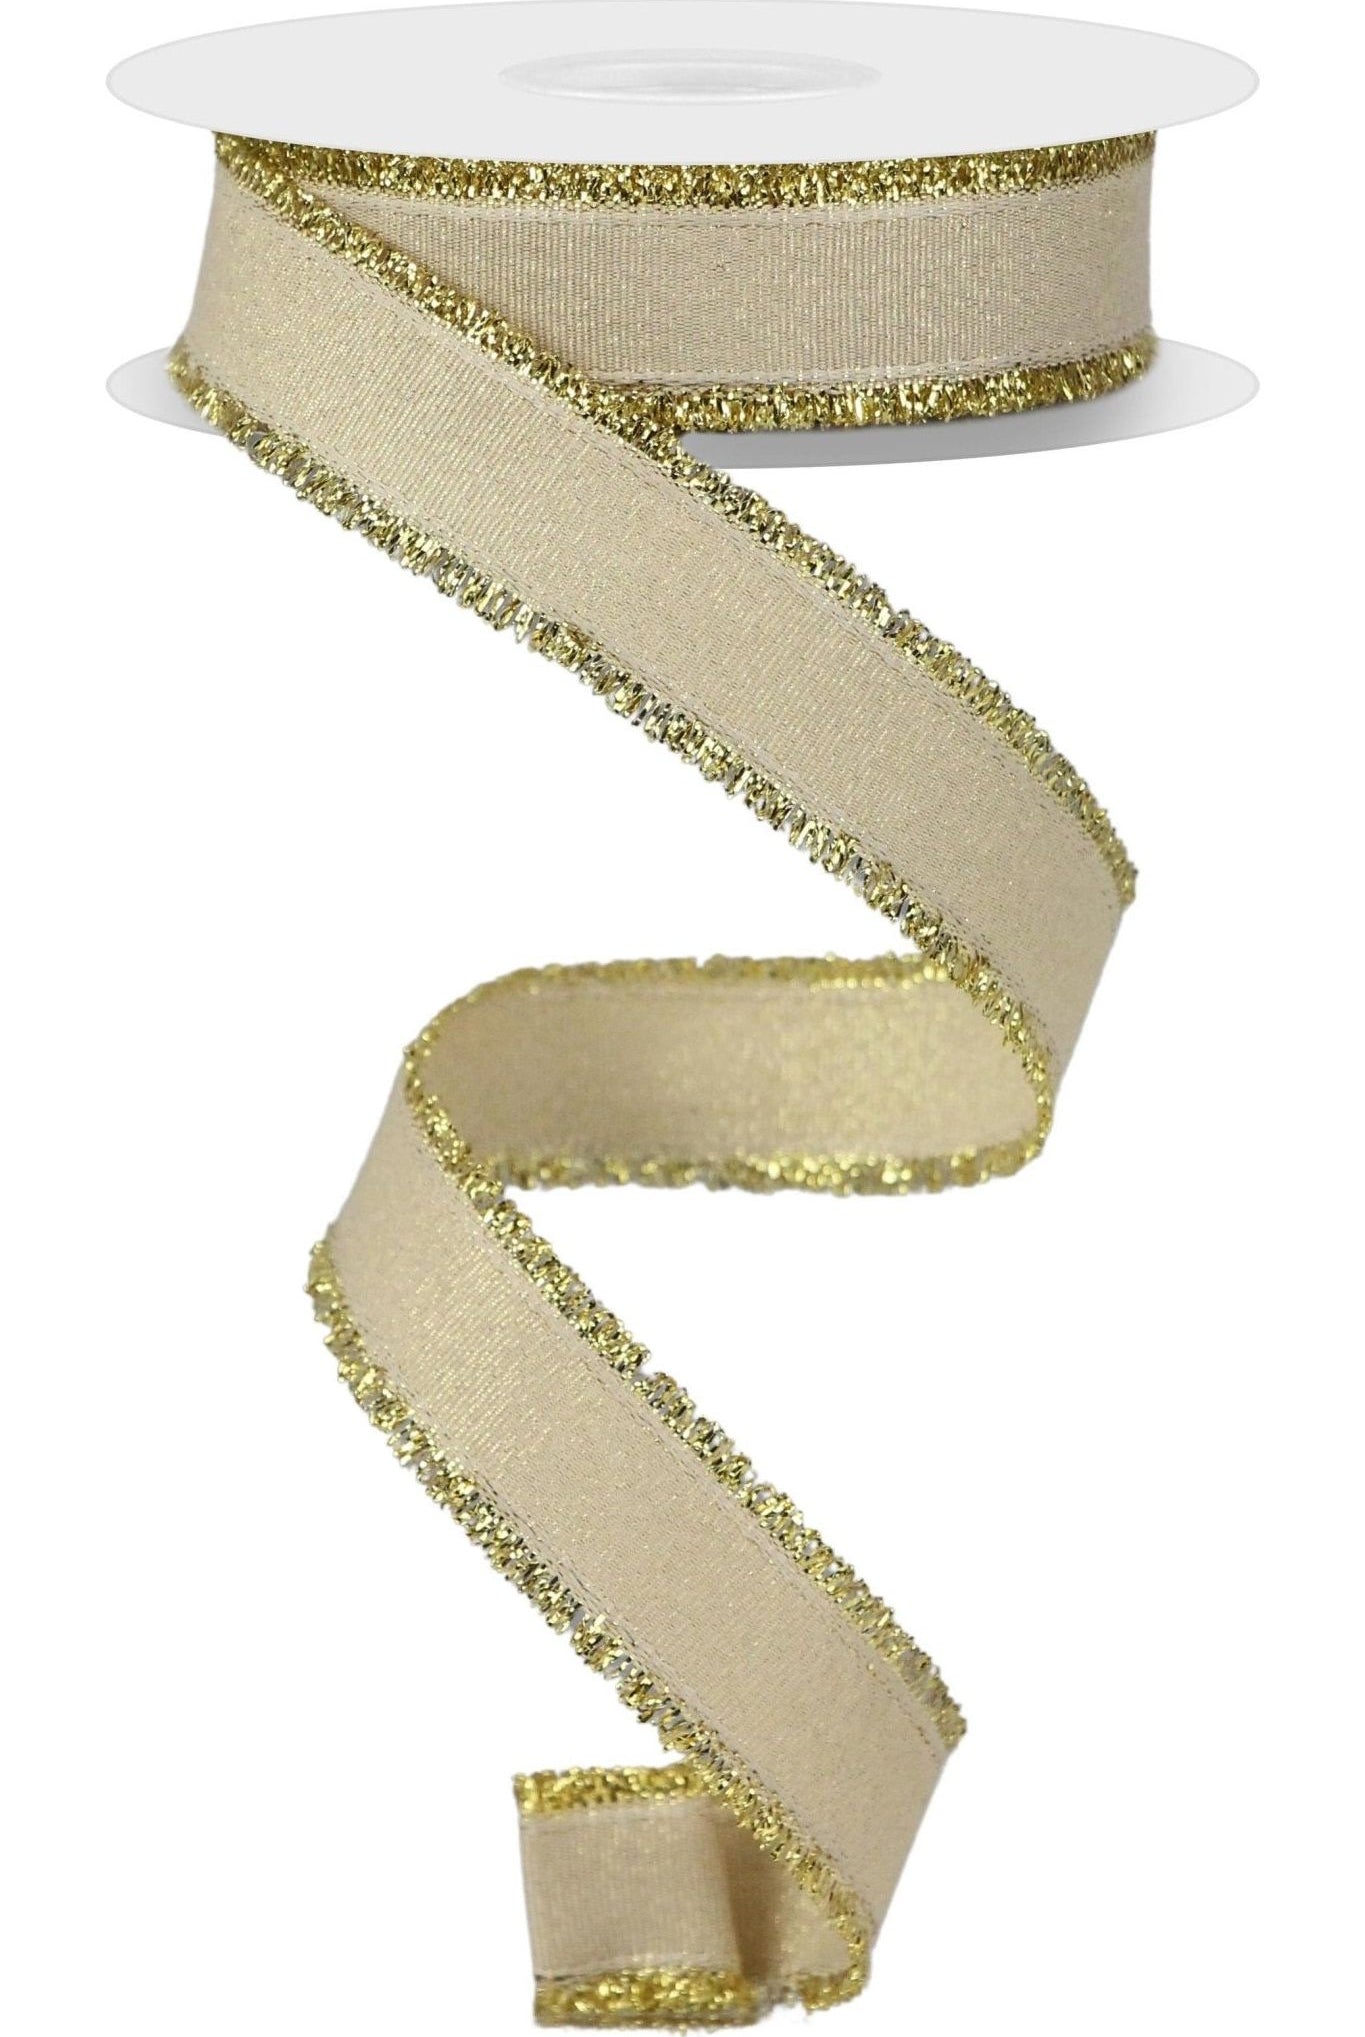 Shop For 7/8" Fuzzy Edge Ribbon: Gold (10 Yards) RN587808